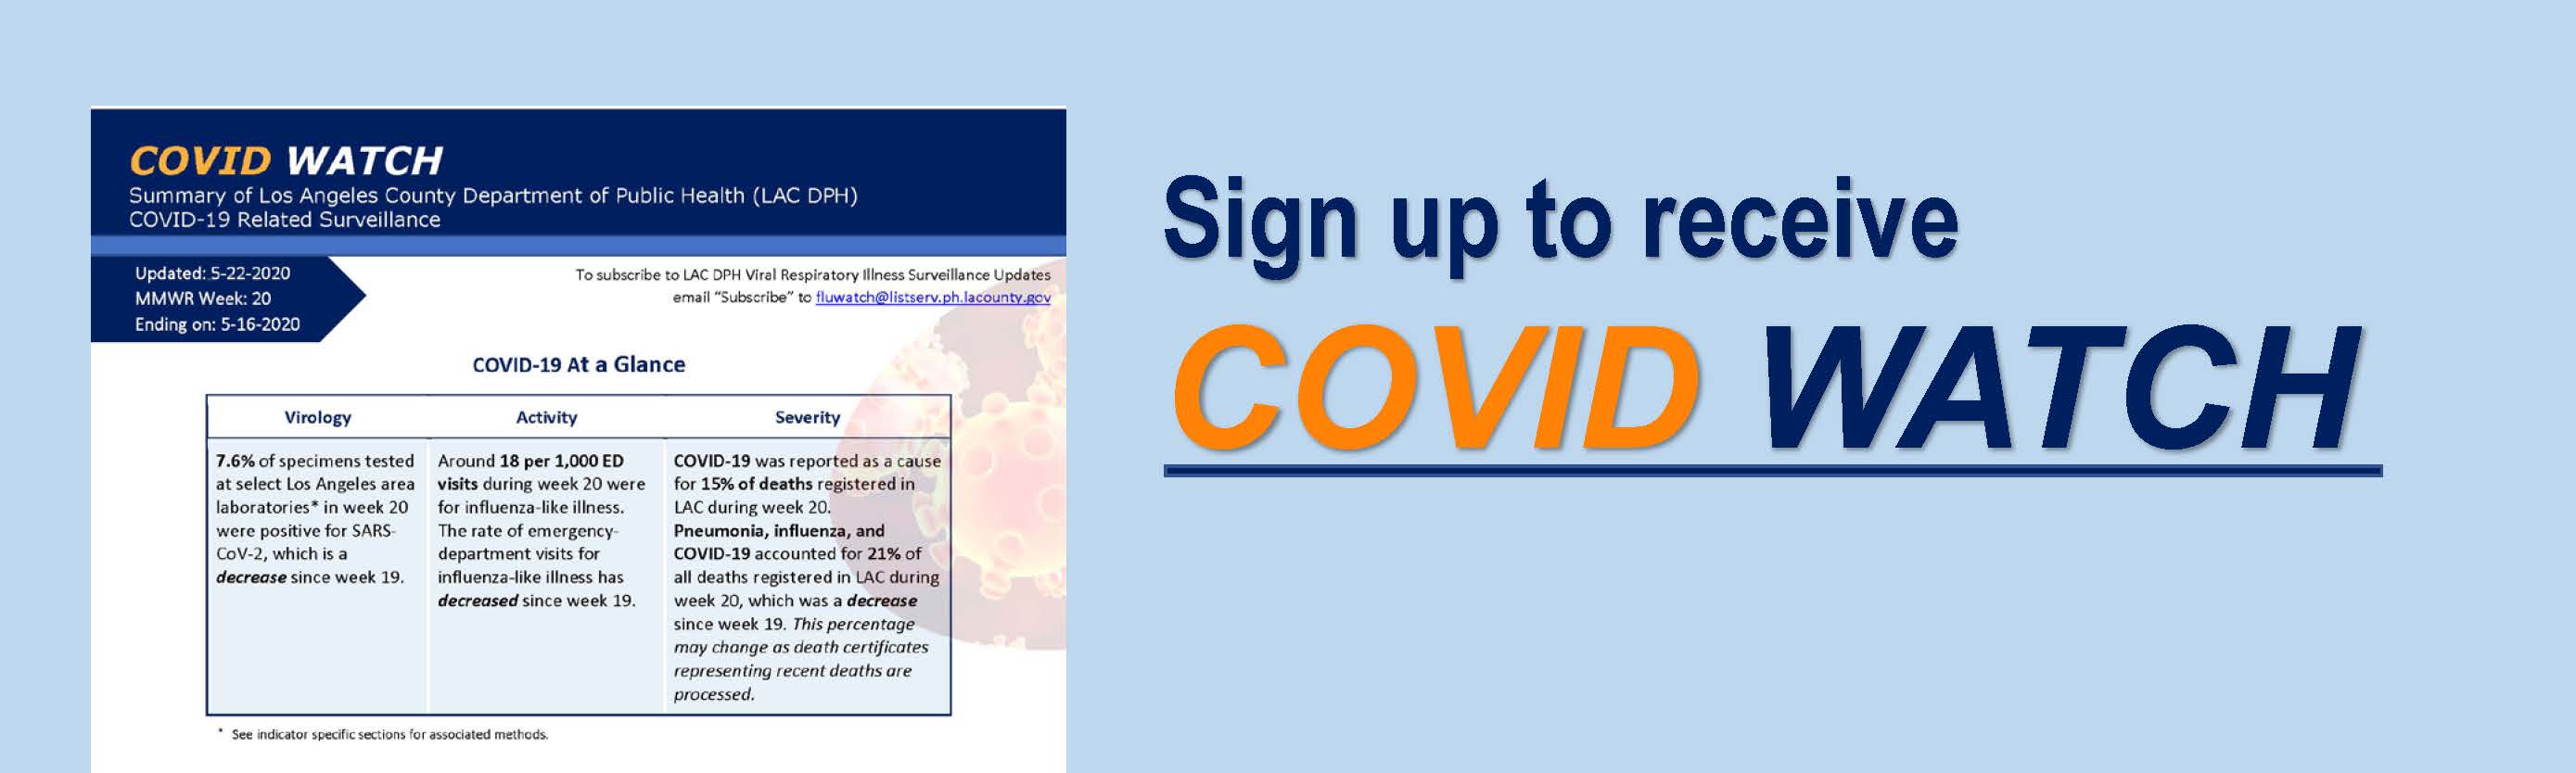 COVID Watch sign up